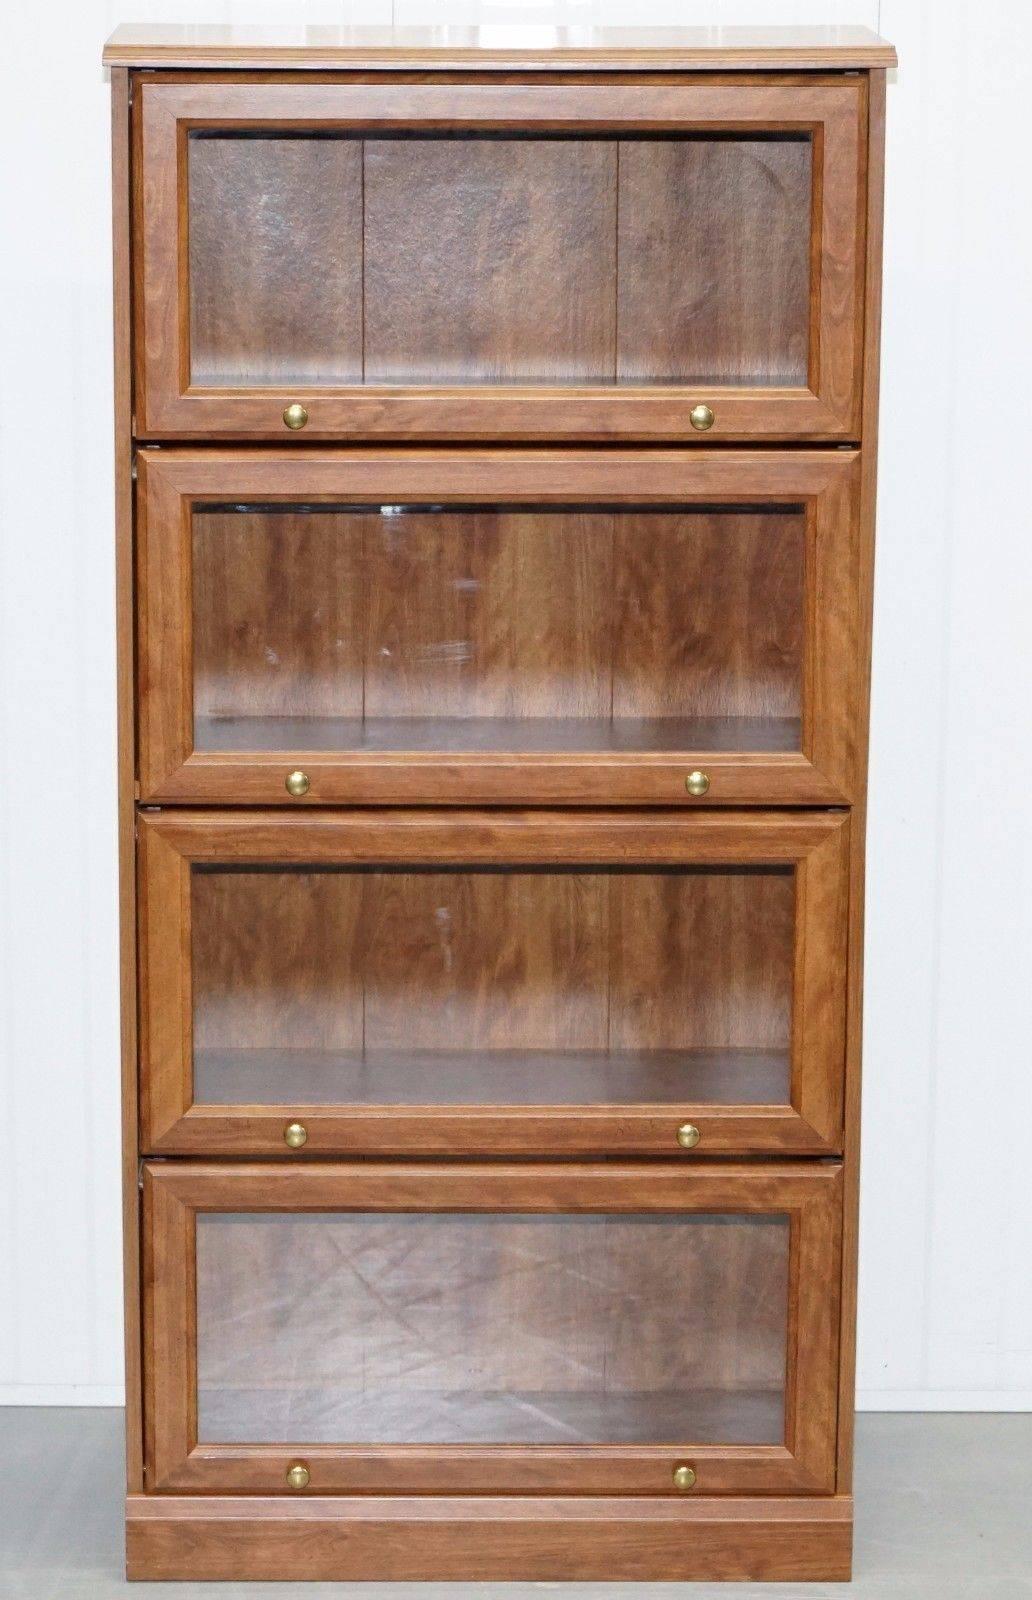 We are delighted to offer for sale this lovely perfect condition folding glass door legal bookcase

A really good looking and well-made piece in near perfect condition, the glass doors lift up and slide into the frame, ideal for small spaces

